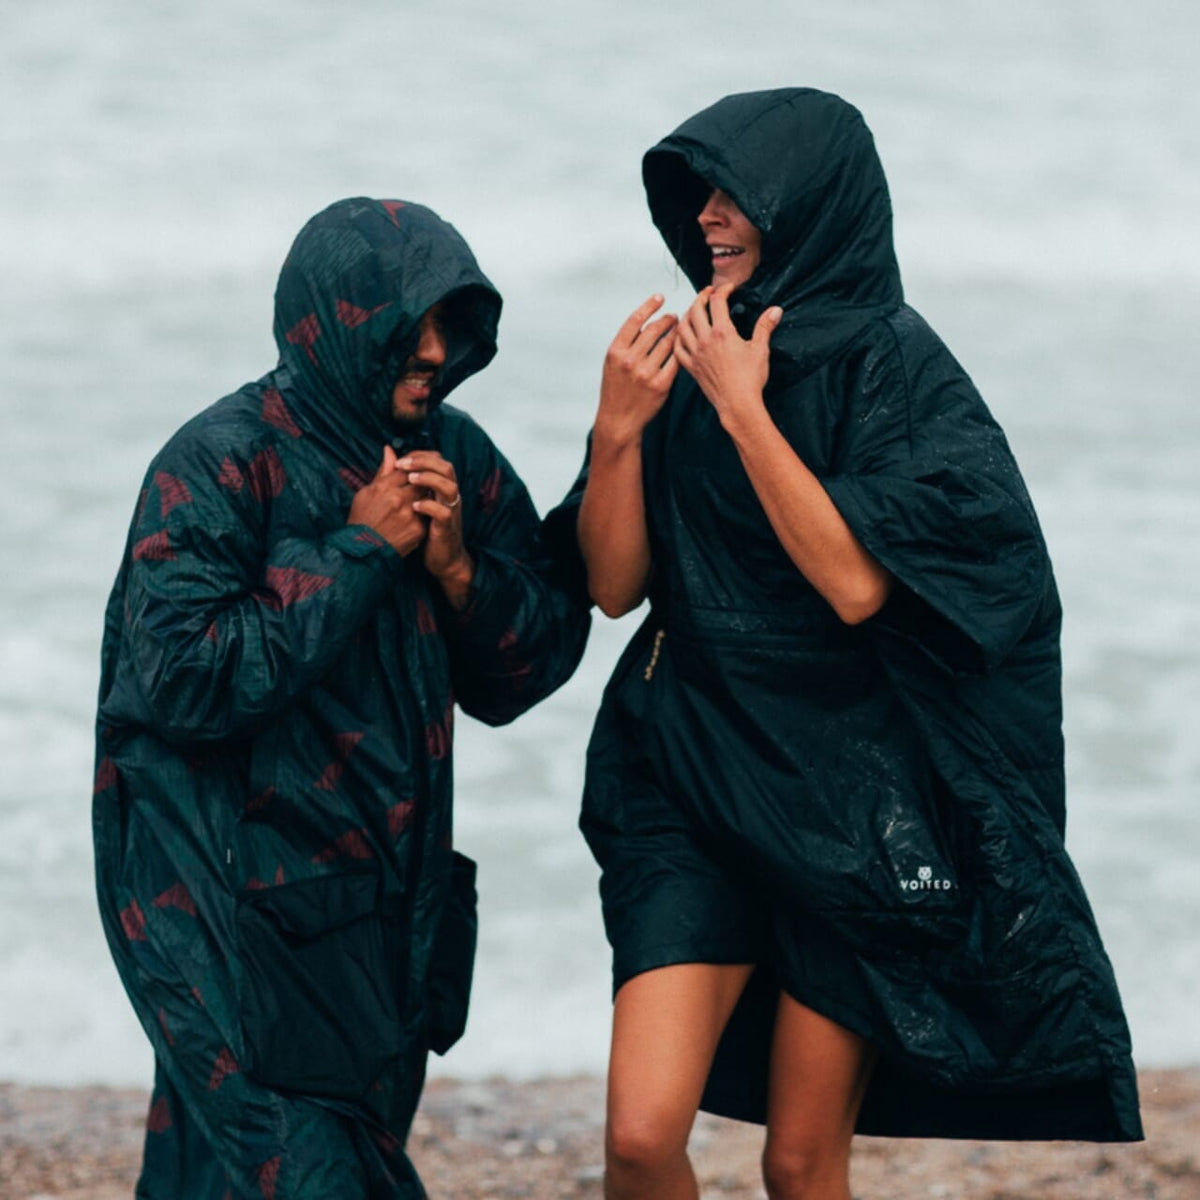 VOITED 2nd Edition Outdoor Poncho for Surfing, Camping, Vanlife & Wild Swimming - Black Changewear VOITED 